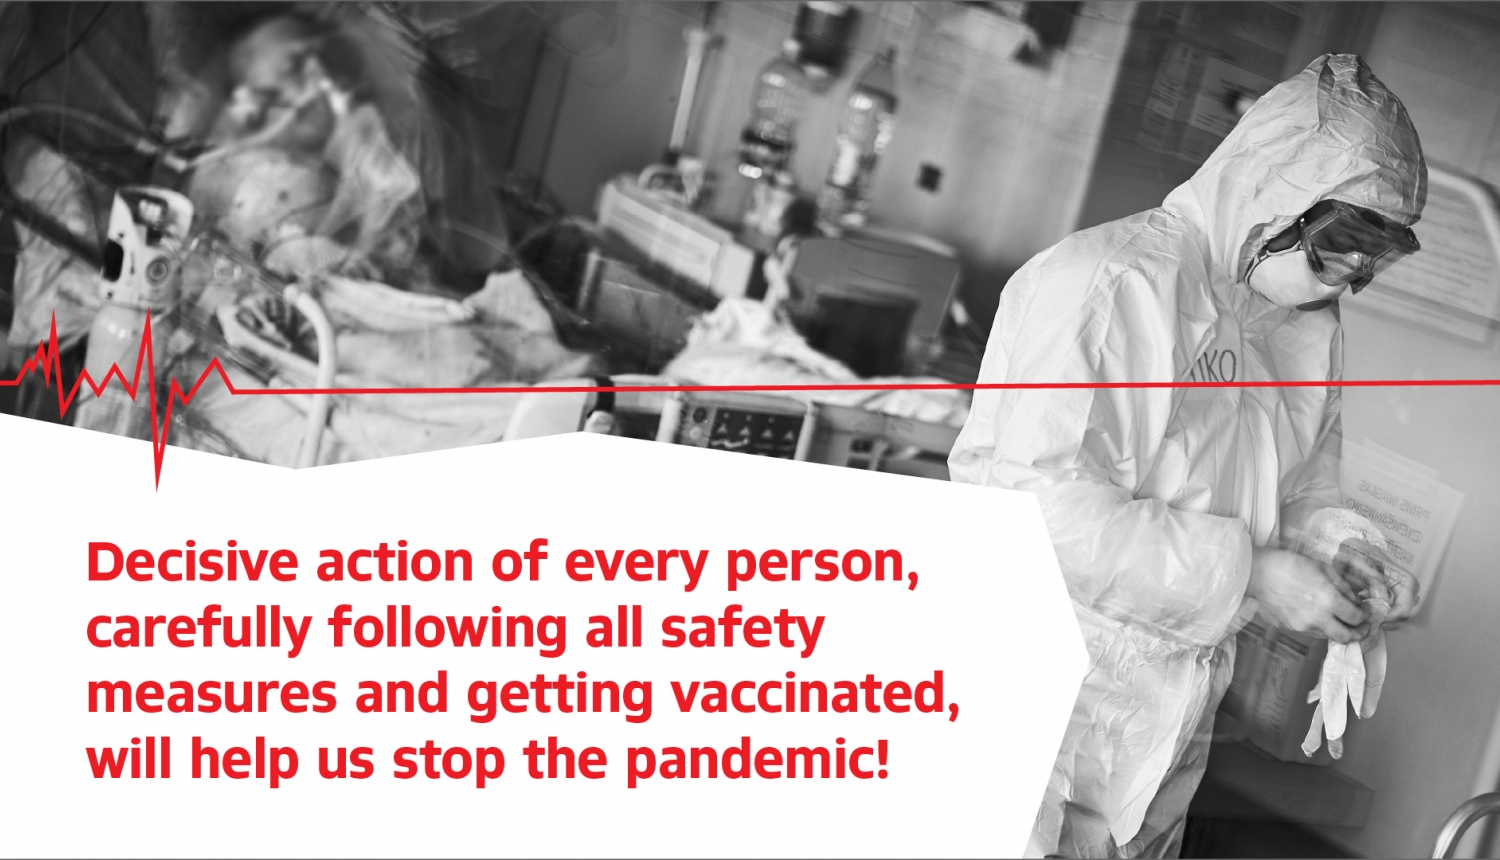 Decisive action of every person, carefully following all safety measures and getting vaccinated, will help us stop the pandemic!